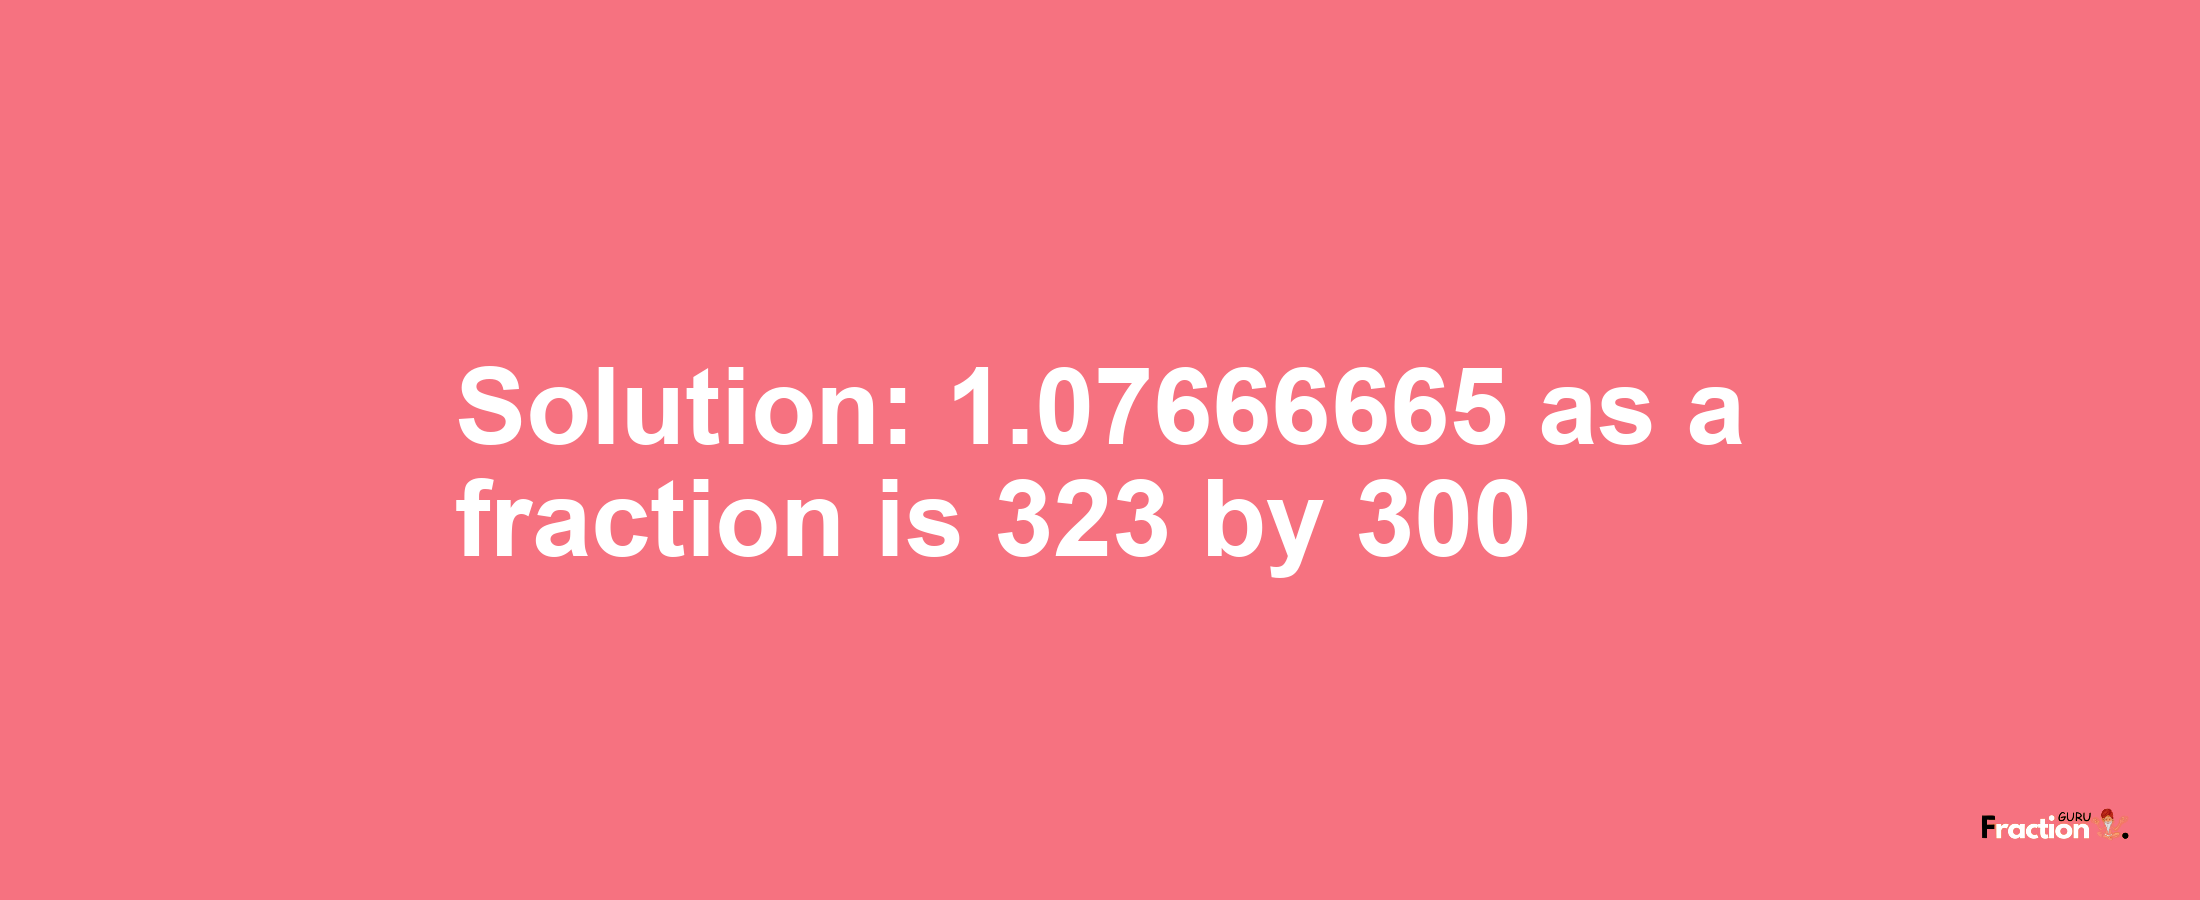 Solution:1.07666665 as a fraction is 323/300